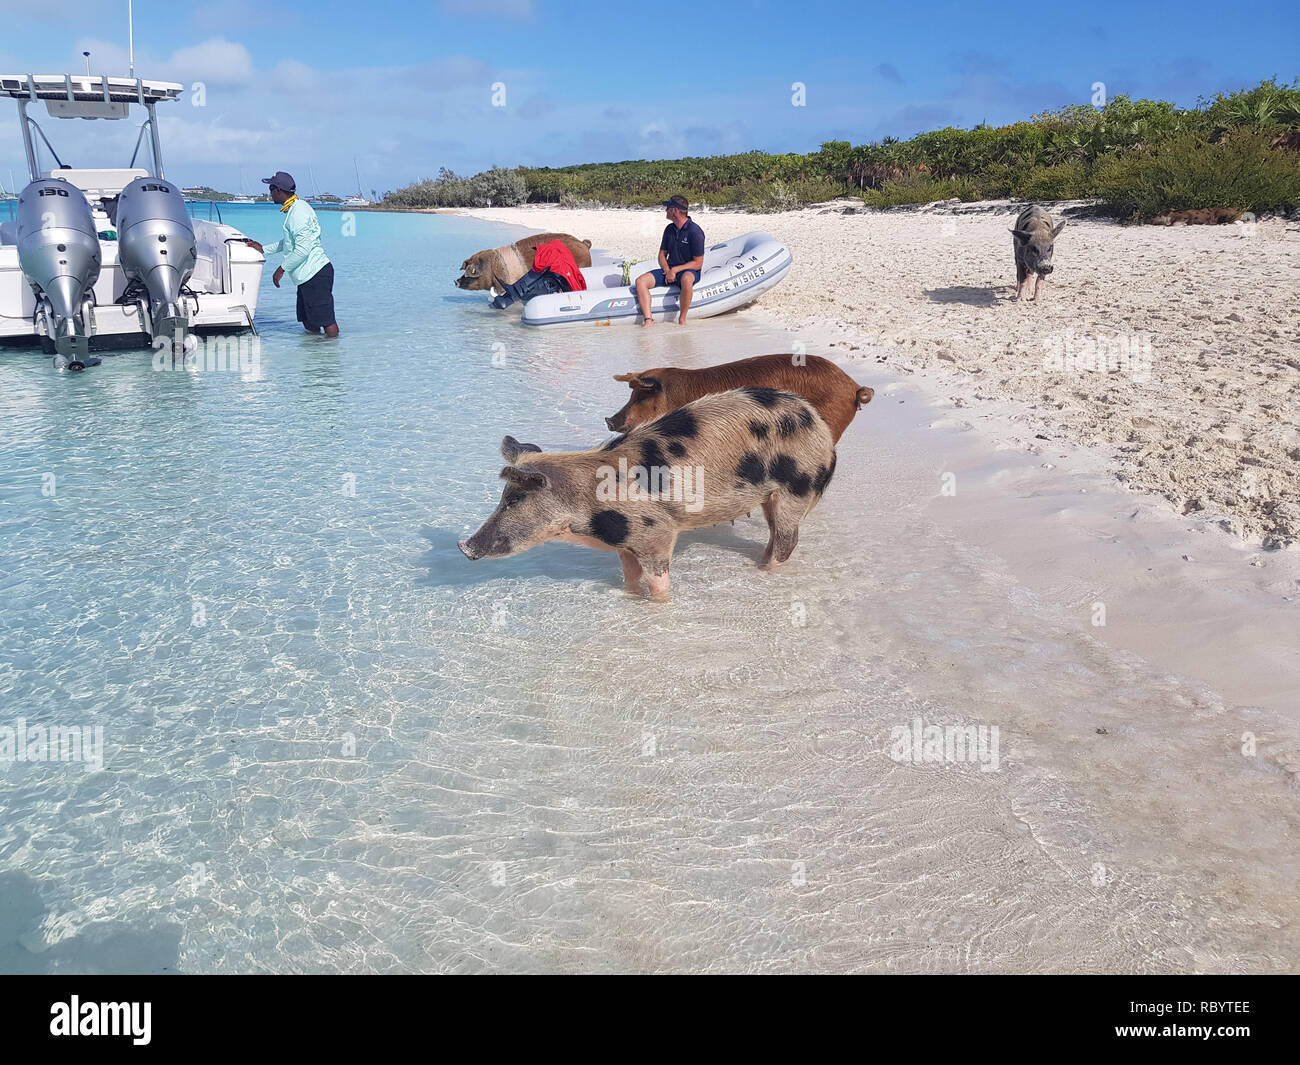 Pig Beach is an uninhabited island located in Exuma, the Bahamas. The island takes its unofficial name from the fact that it is populated pigs. Stock Photo